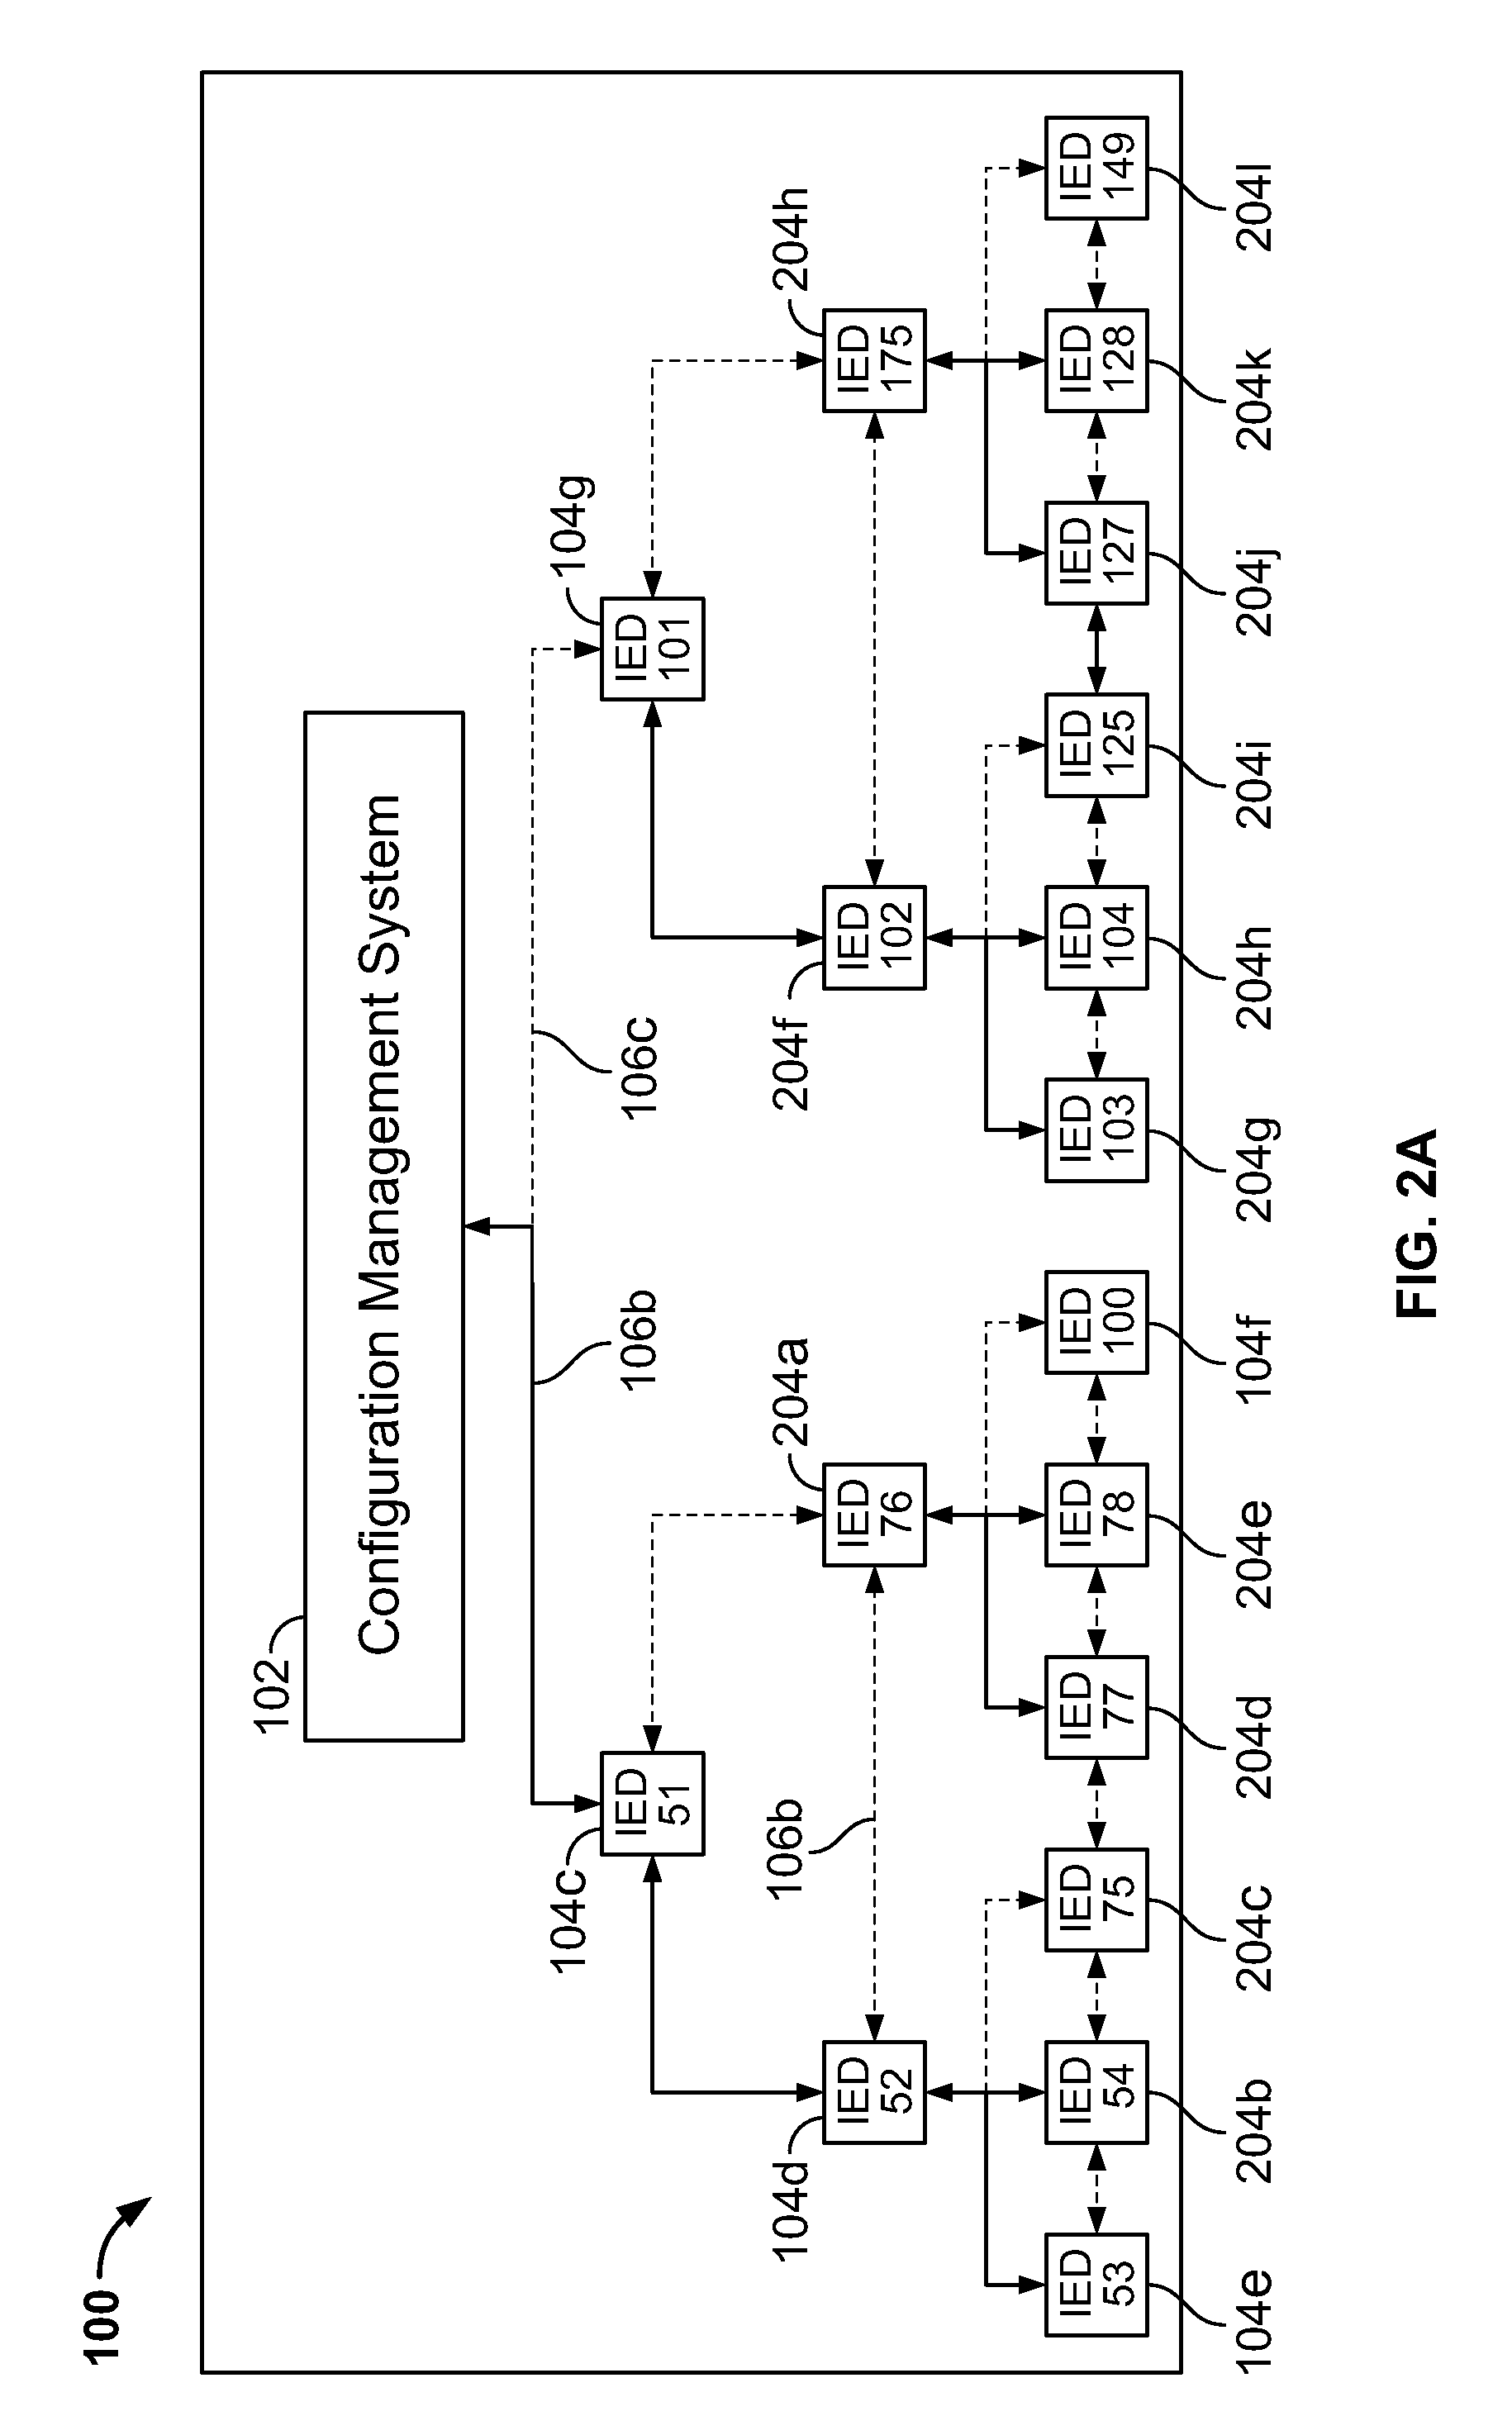 Method and system for cascading peer-to-peer configuration of large systems of ieds